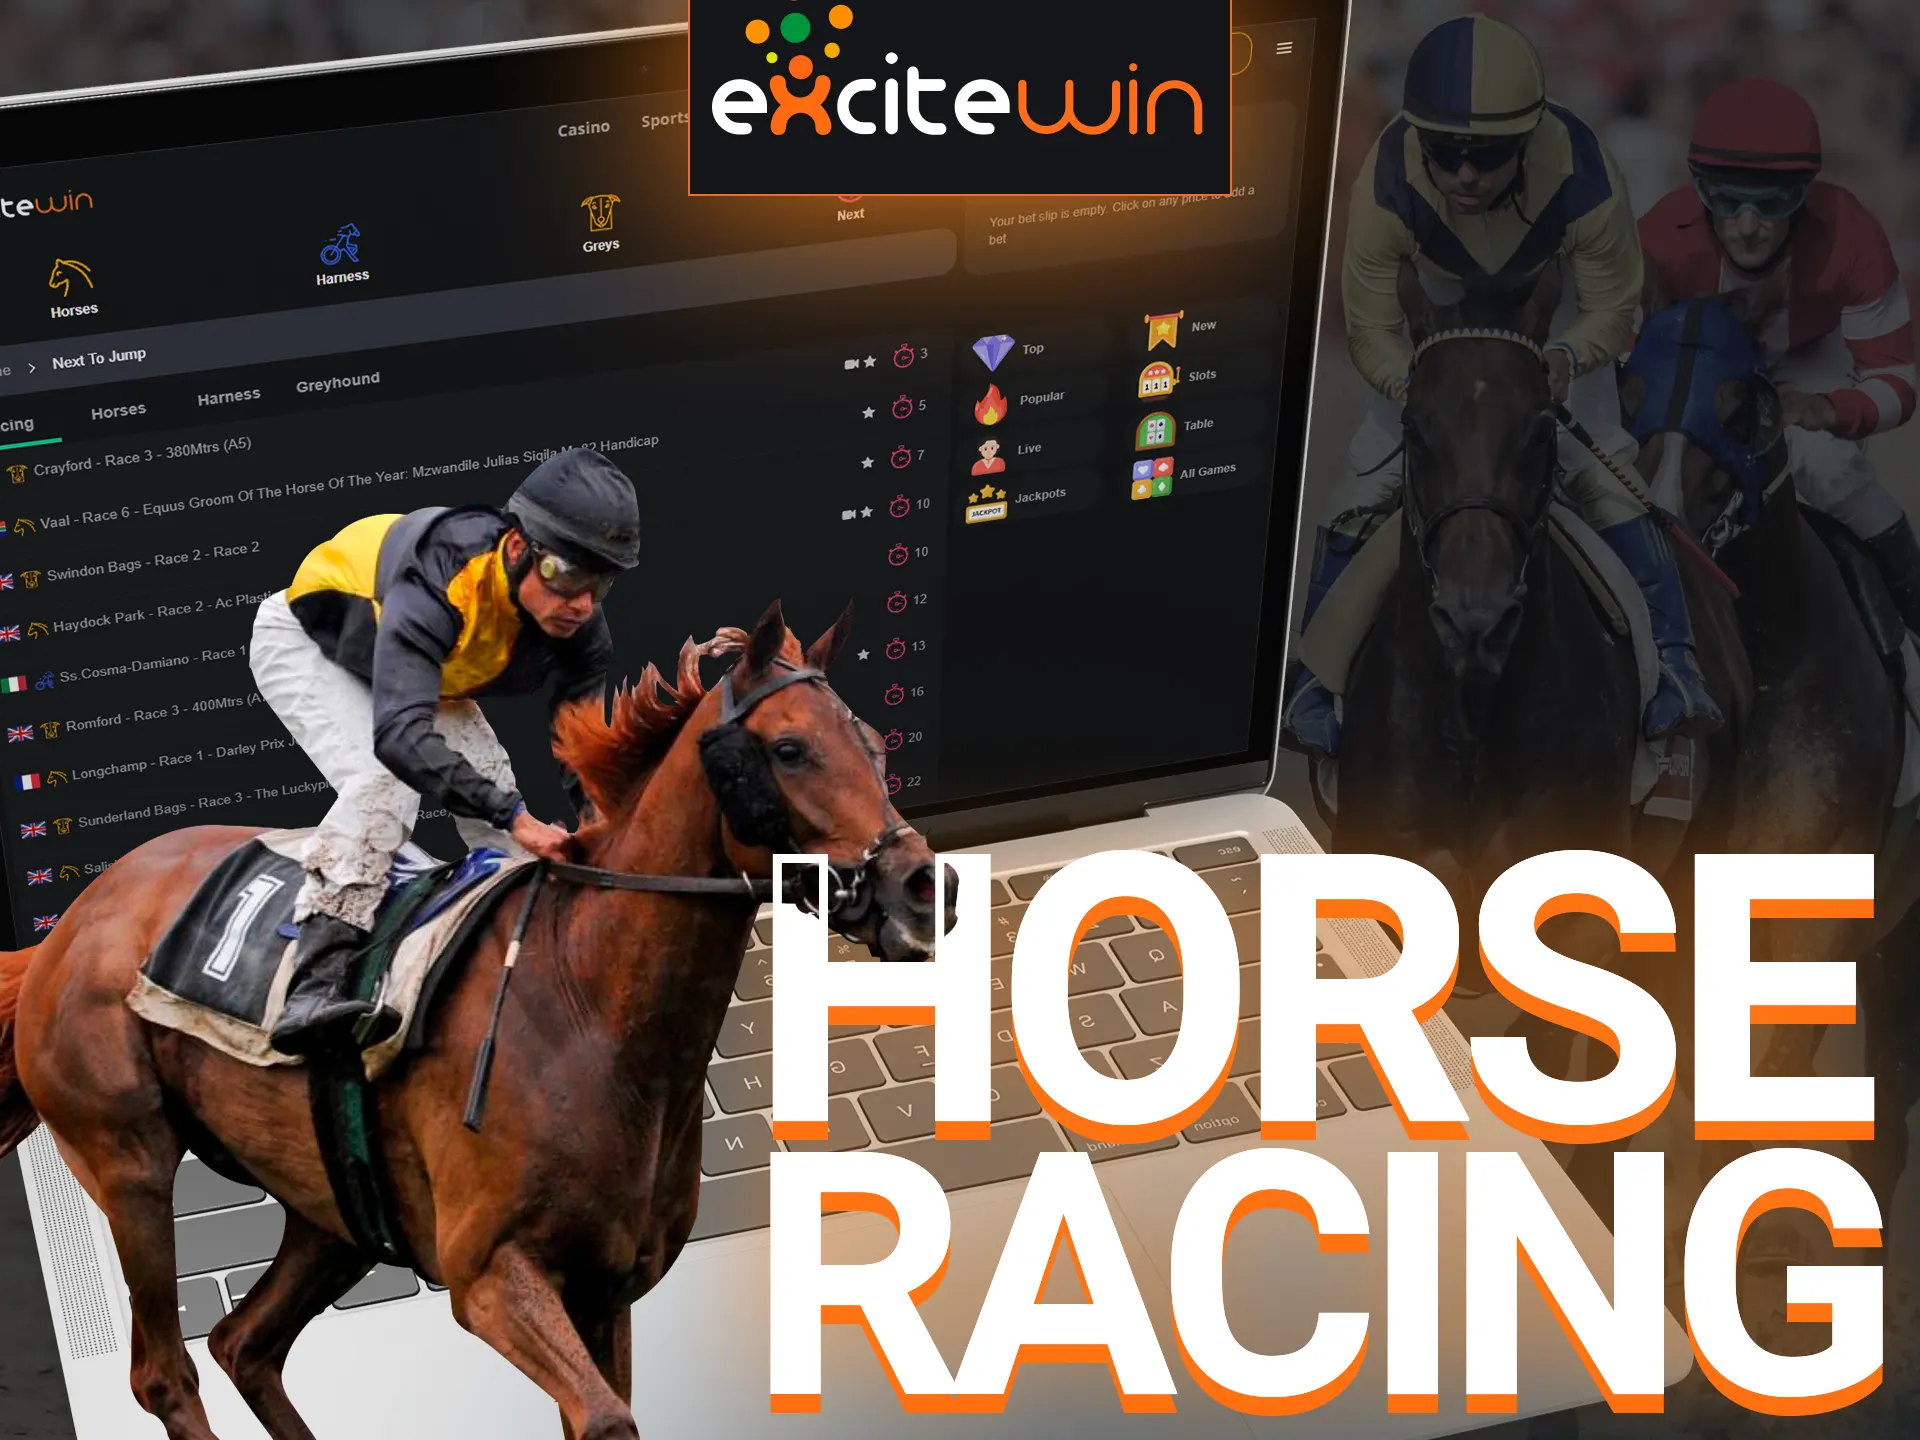 With Excitewin, place your bets on horse racing.